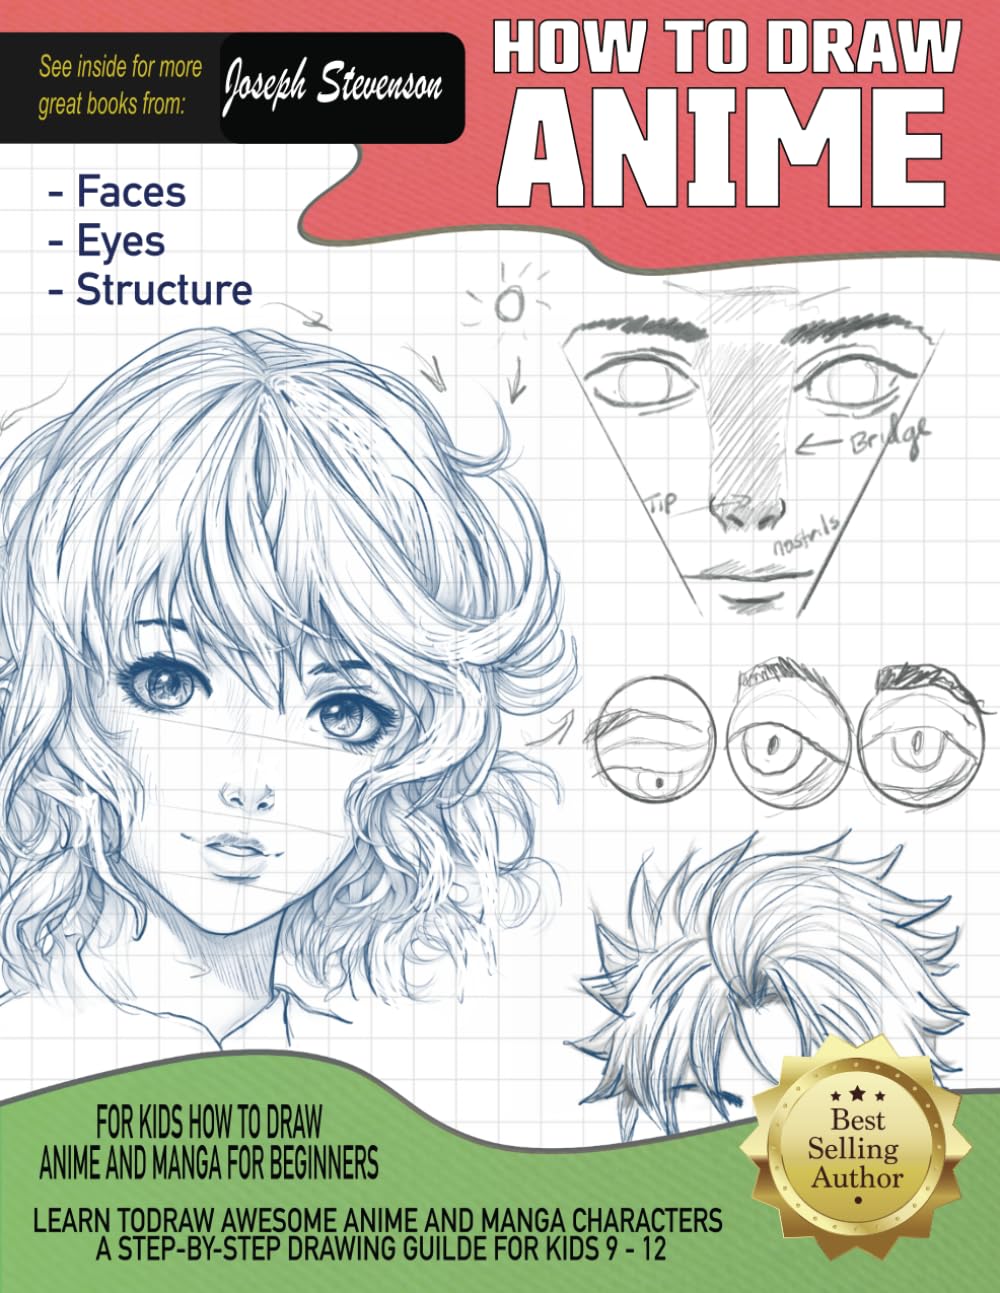 How to Draw Manga for the Beginner: Step by Step Guides in Drawing